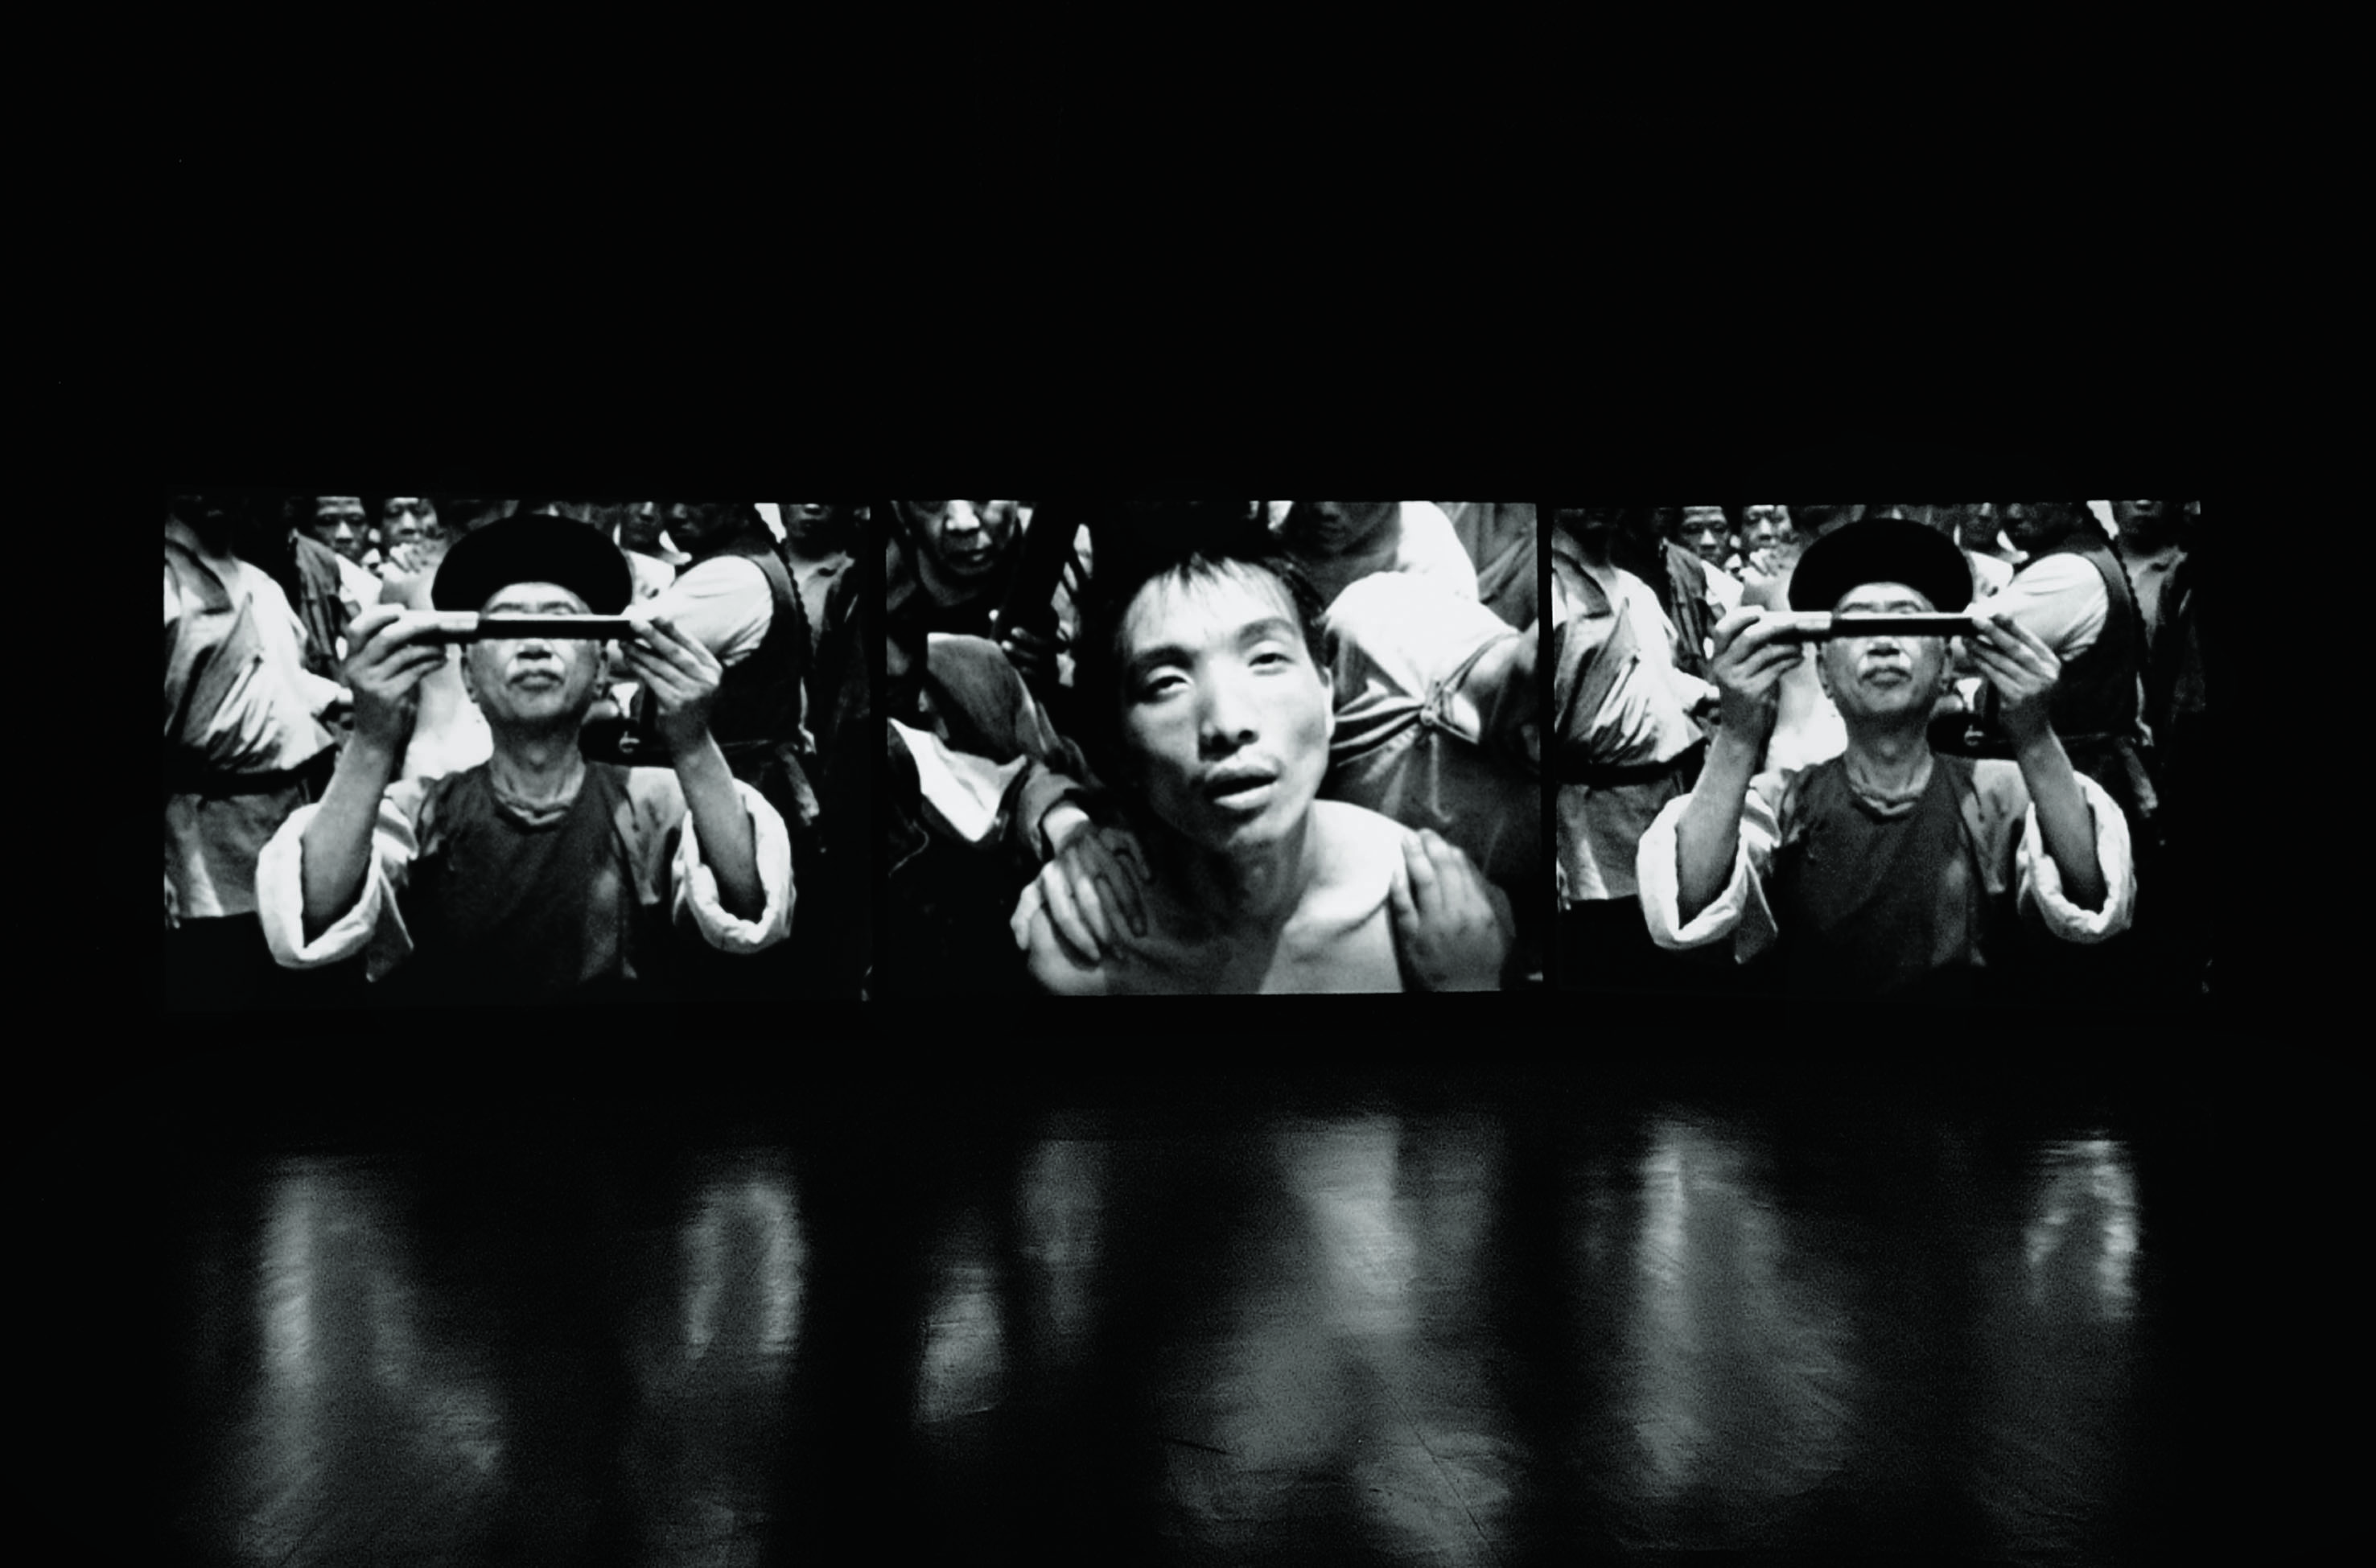 Chen Chieh-Jen Lingchi – Echoes of a Historical Photograph, 2002 3-Kanal-Videoinstallation, Schwarz-Weiß, 21:04 Min. / 3-channel video installation, black-and white, 21:04 min. M+ Sigg Collection, Hong Kong. By donation © Chen Chieh-Jen